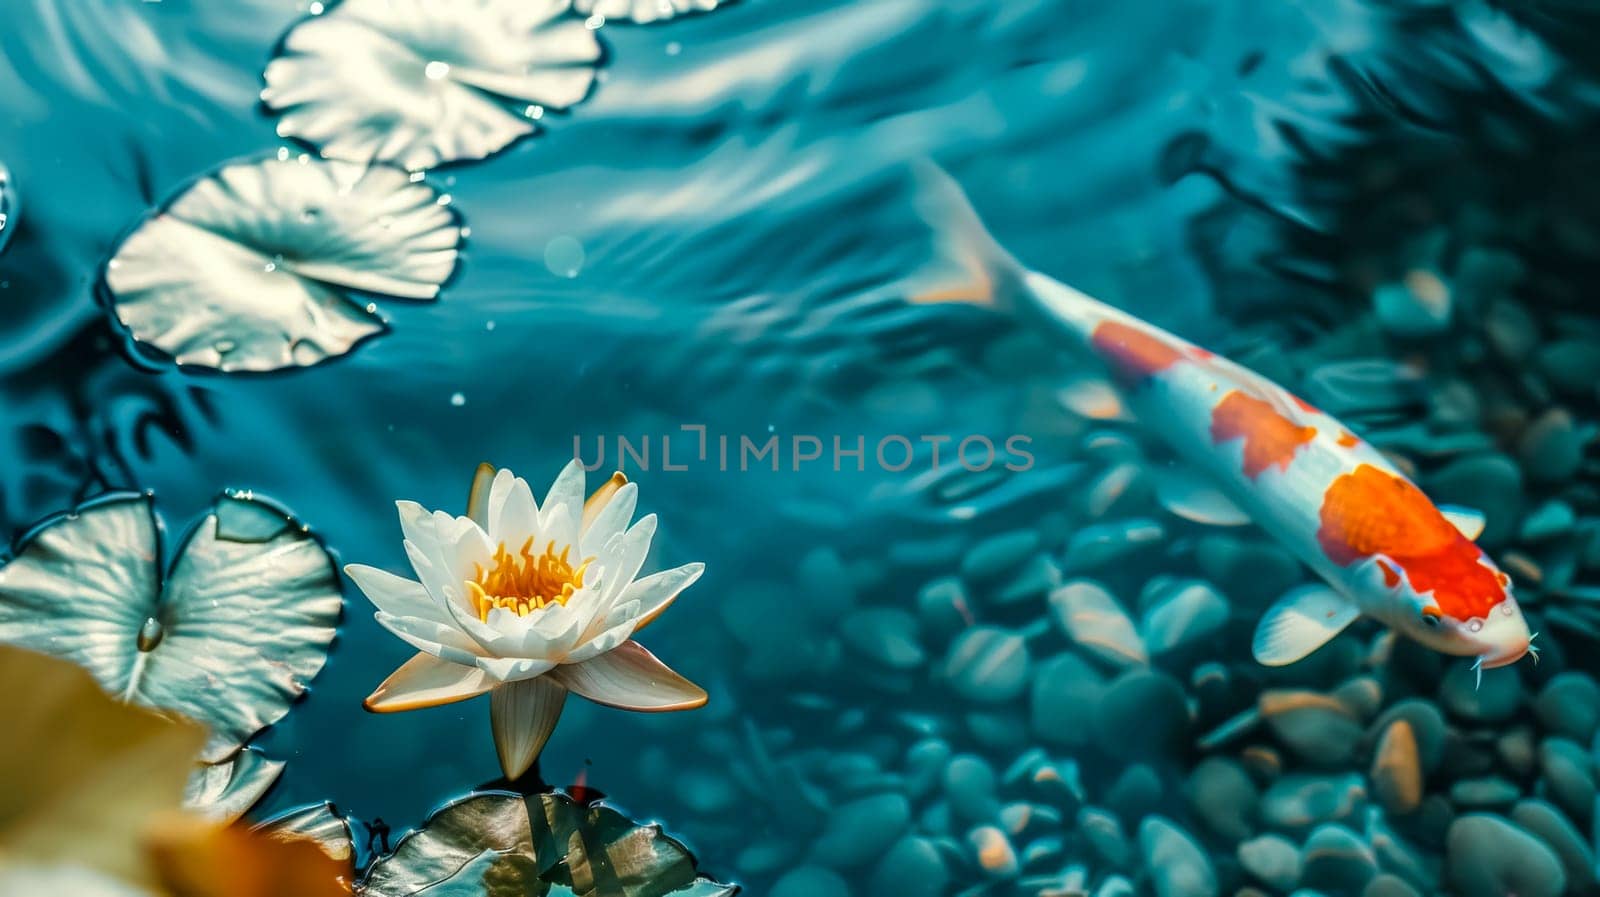 Serene image of a colorful koi fish swimming near a blooming water lily in a tranquil pond